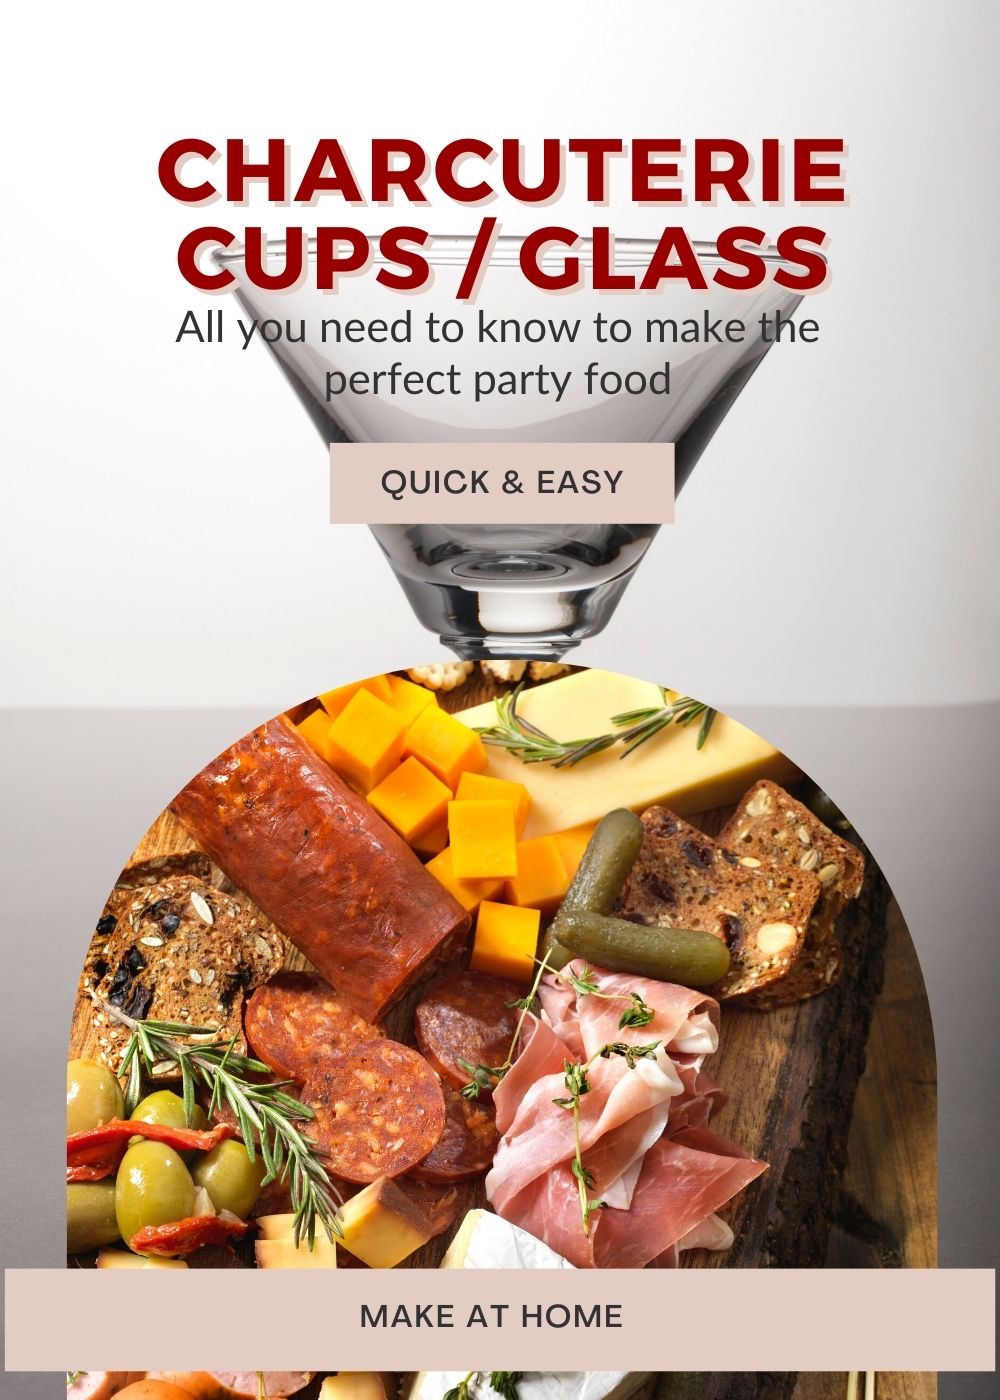 Charcuterie cups or glasses ideas fillings how to make best tips